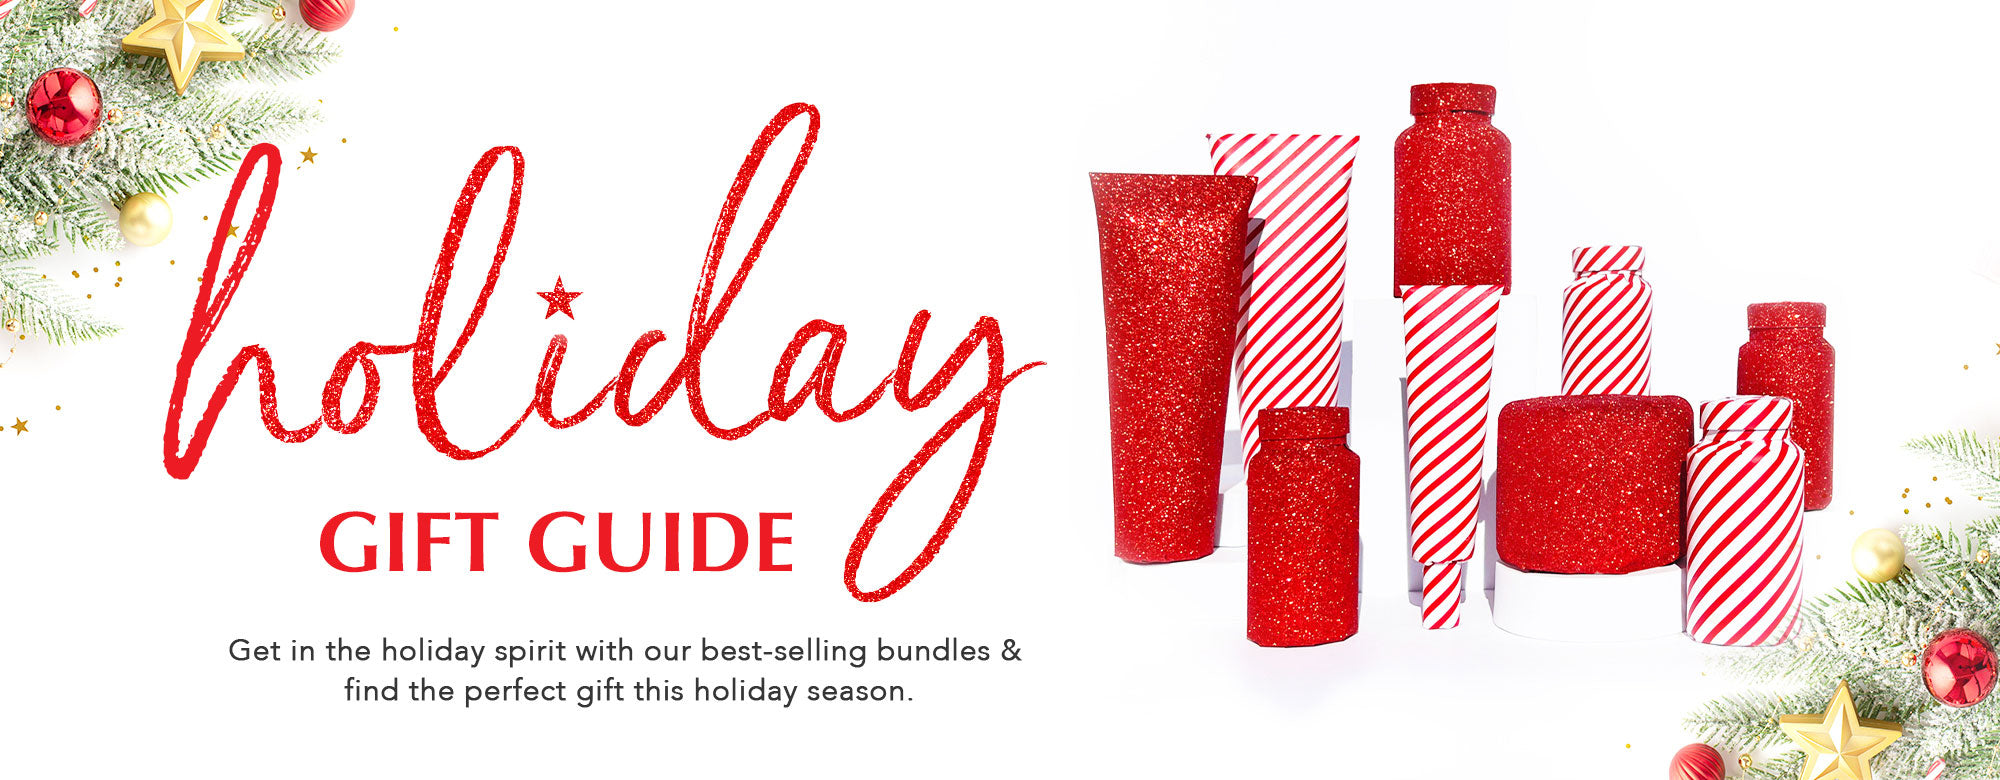 Get in the holiday spirit with our best-selling bundles